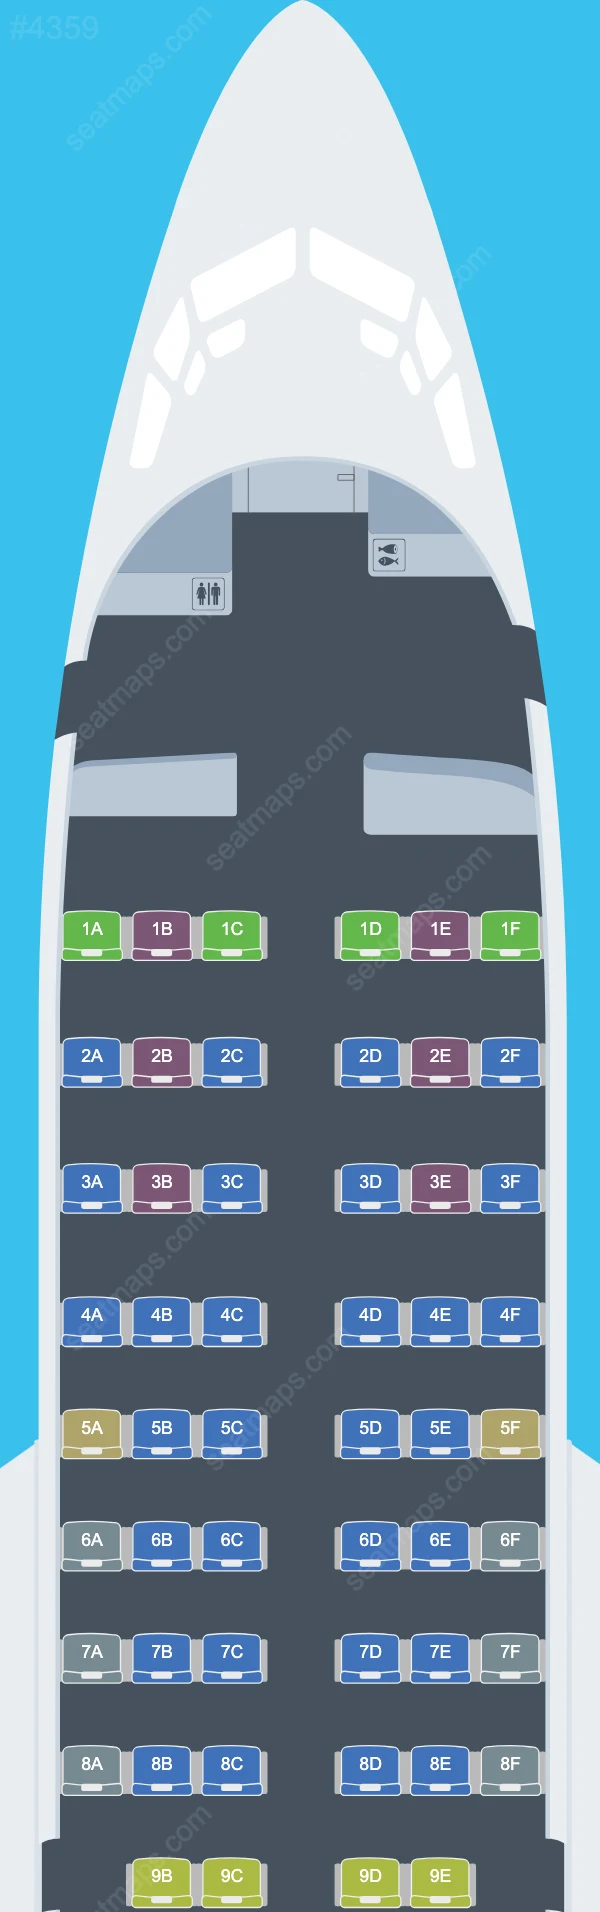 Alexandria Airlines Boeing 737 Seat Maps 737-500